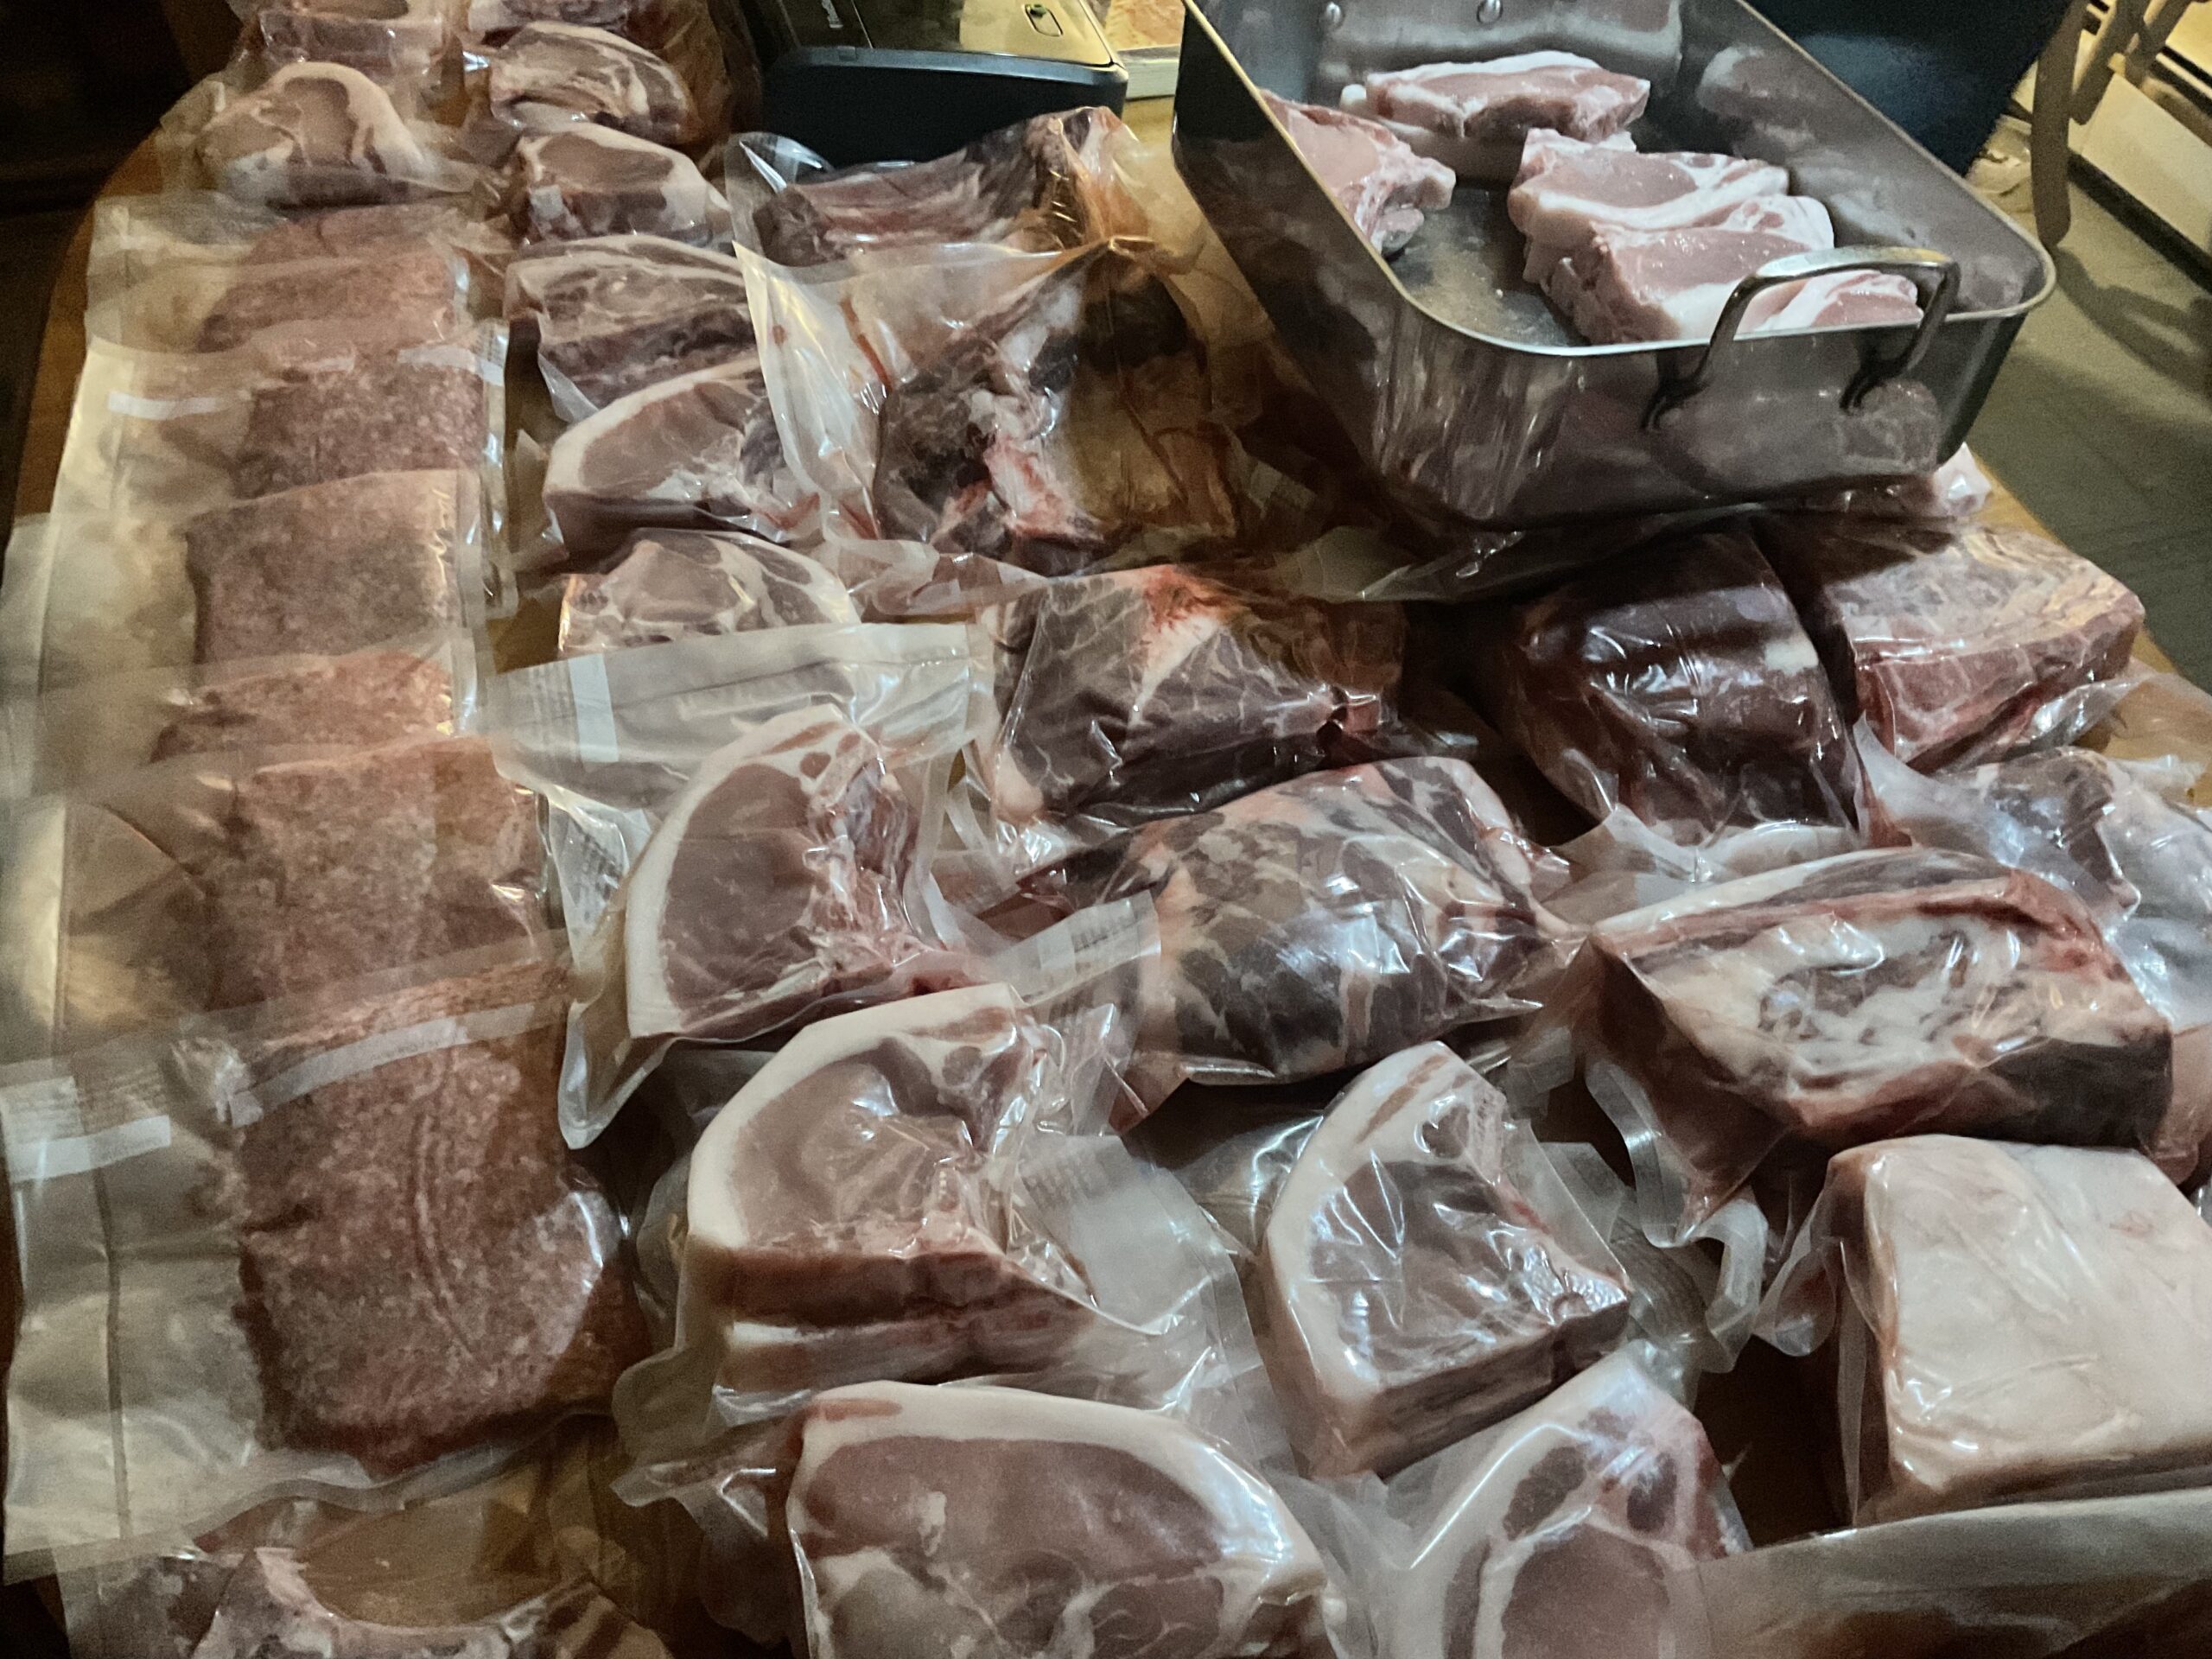 Packaged Pork Chops, Roasts, Burger, and More!